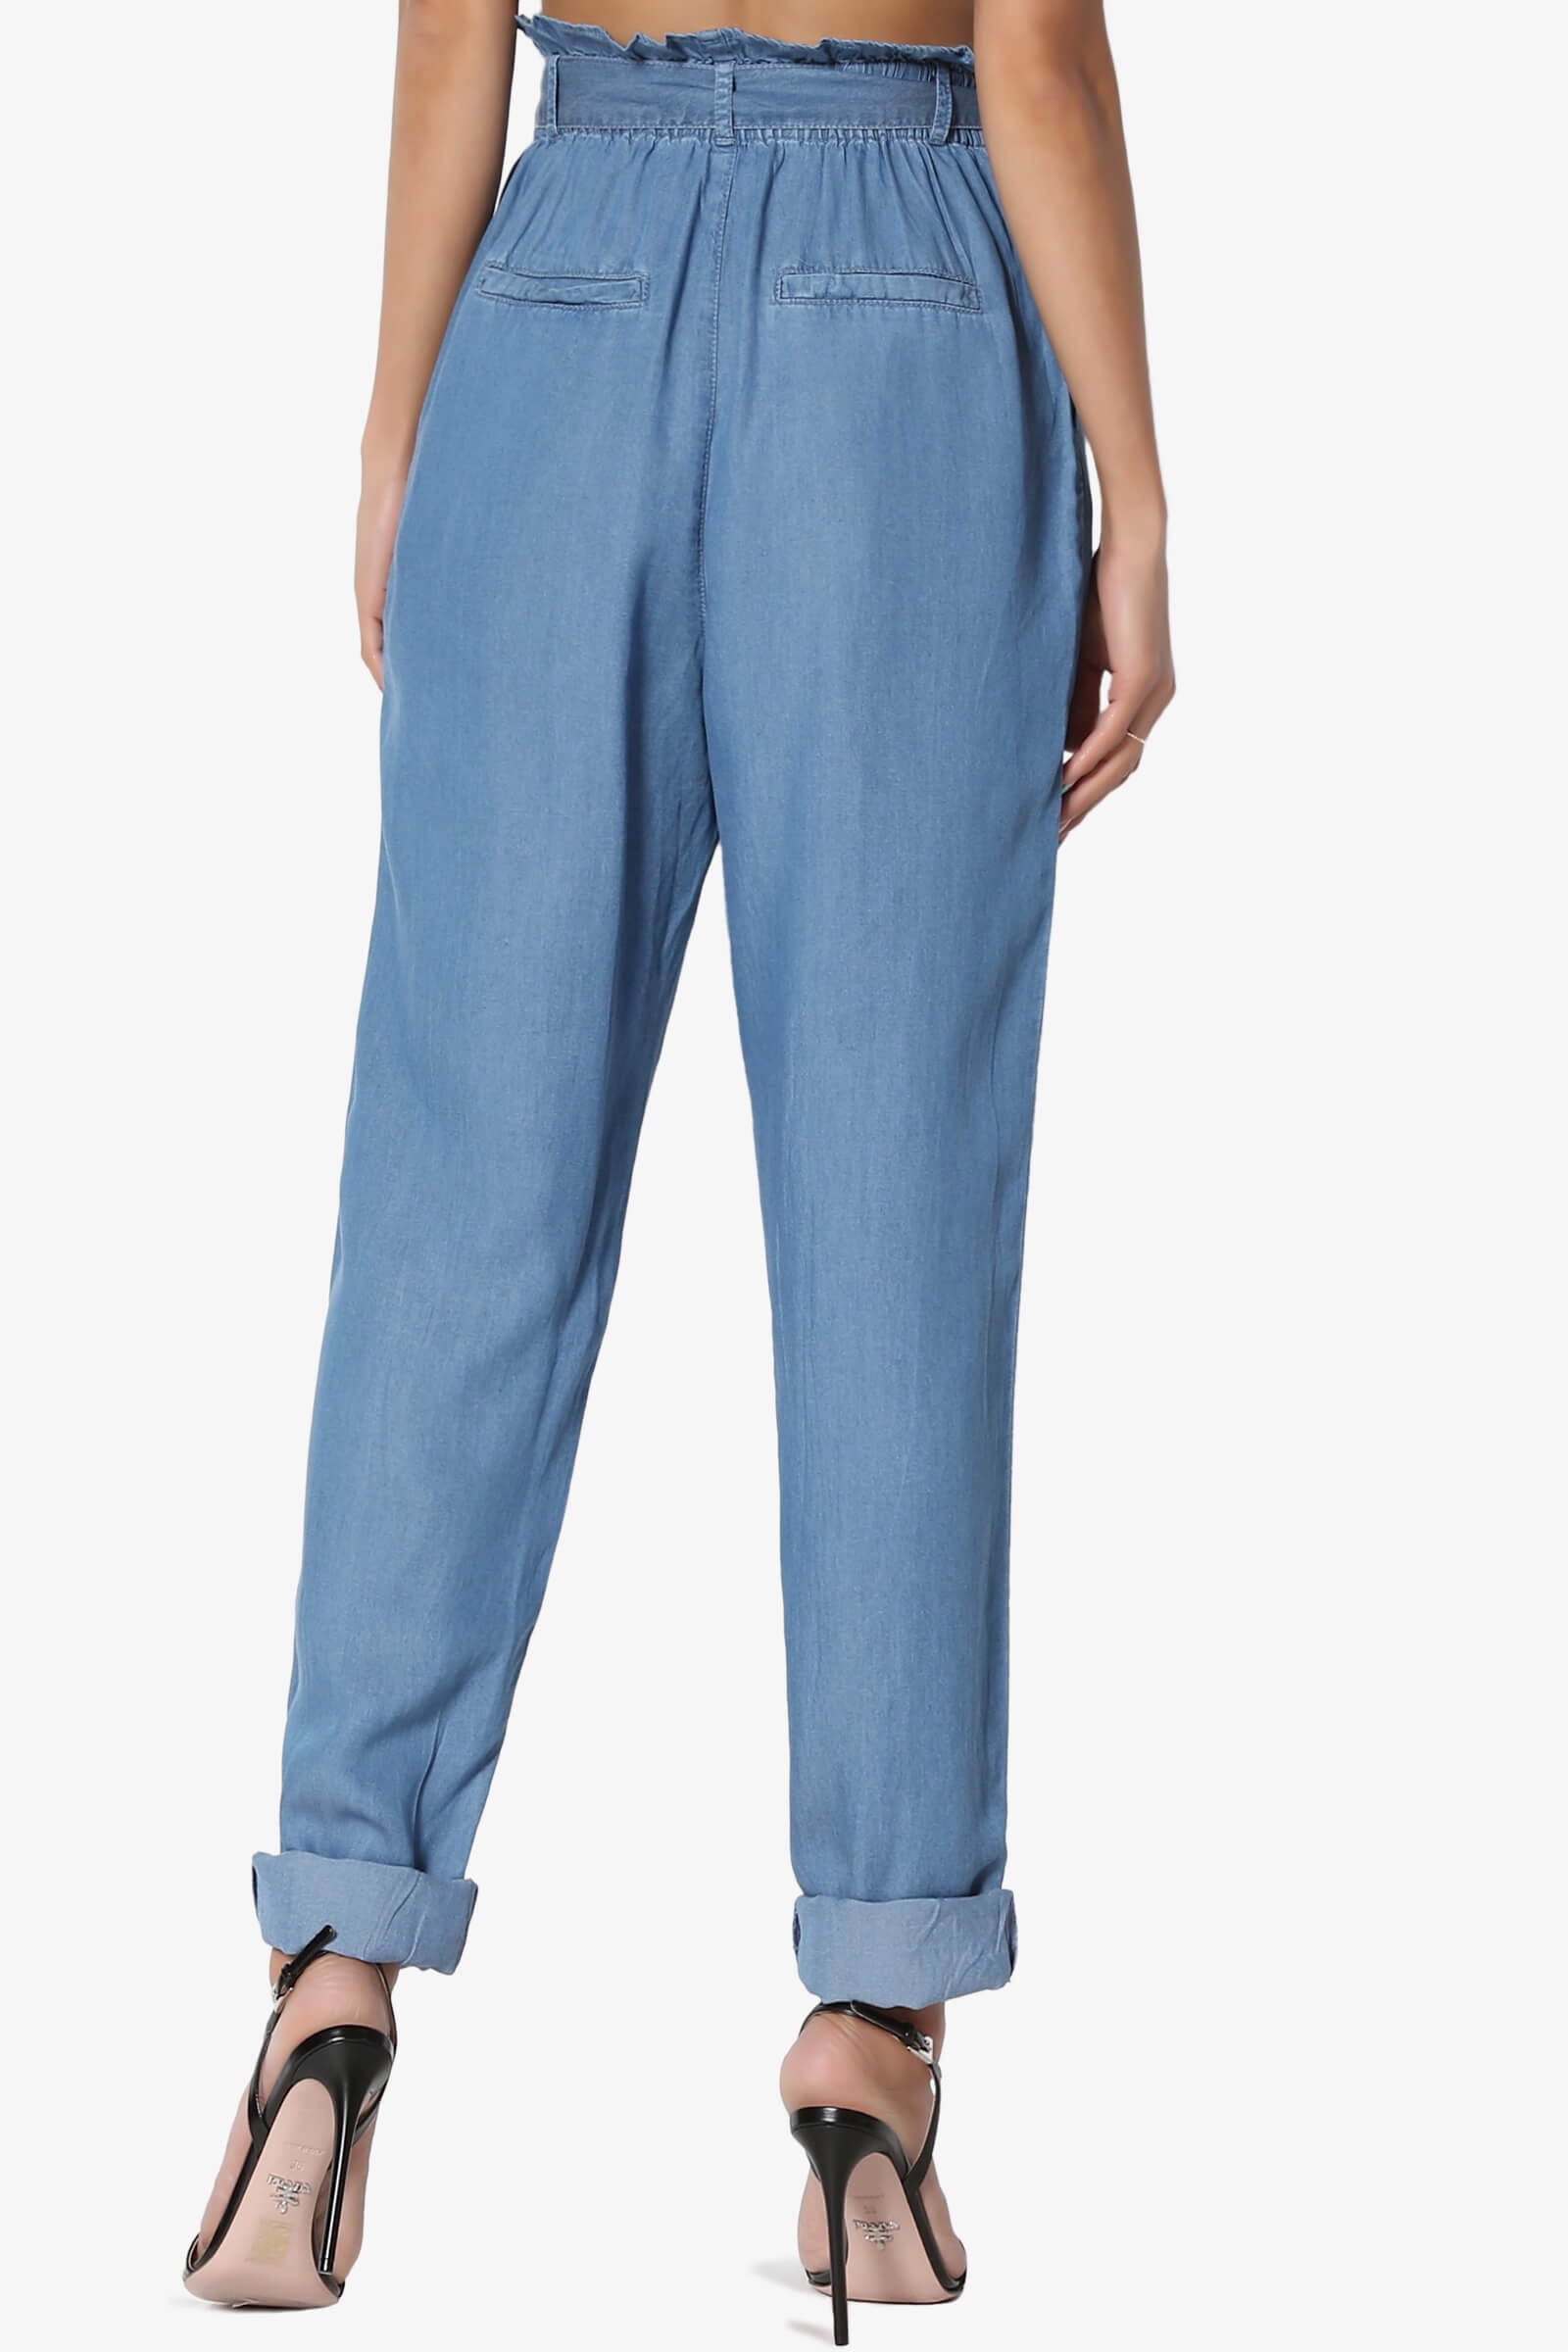 The Side Zip Trouser Pant